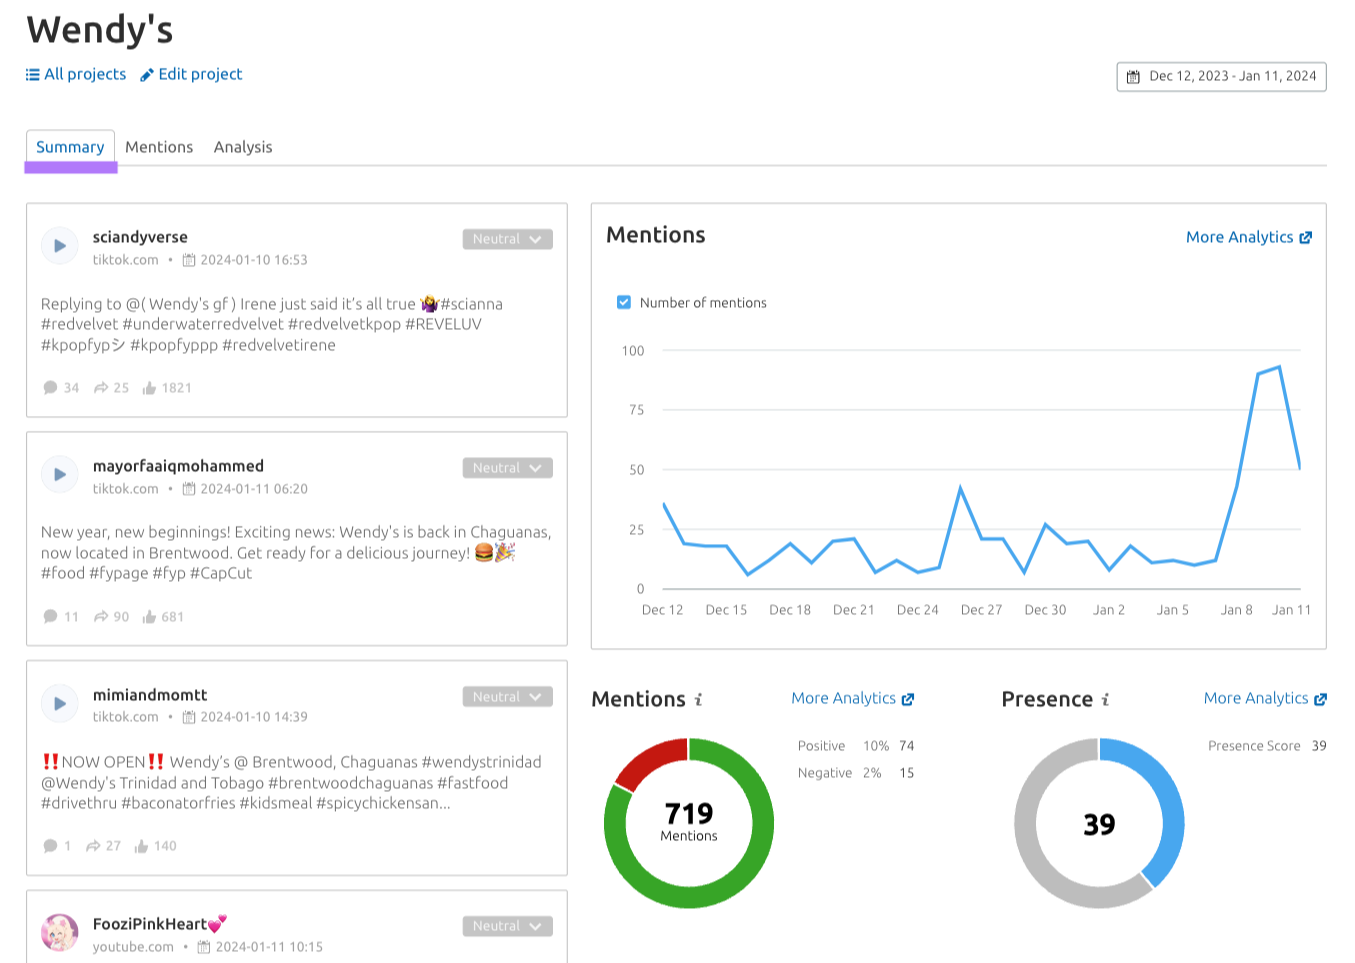 A "Summary" dashboard for "Wendy's" in Media Monitoring app